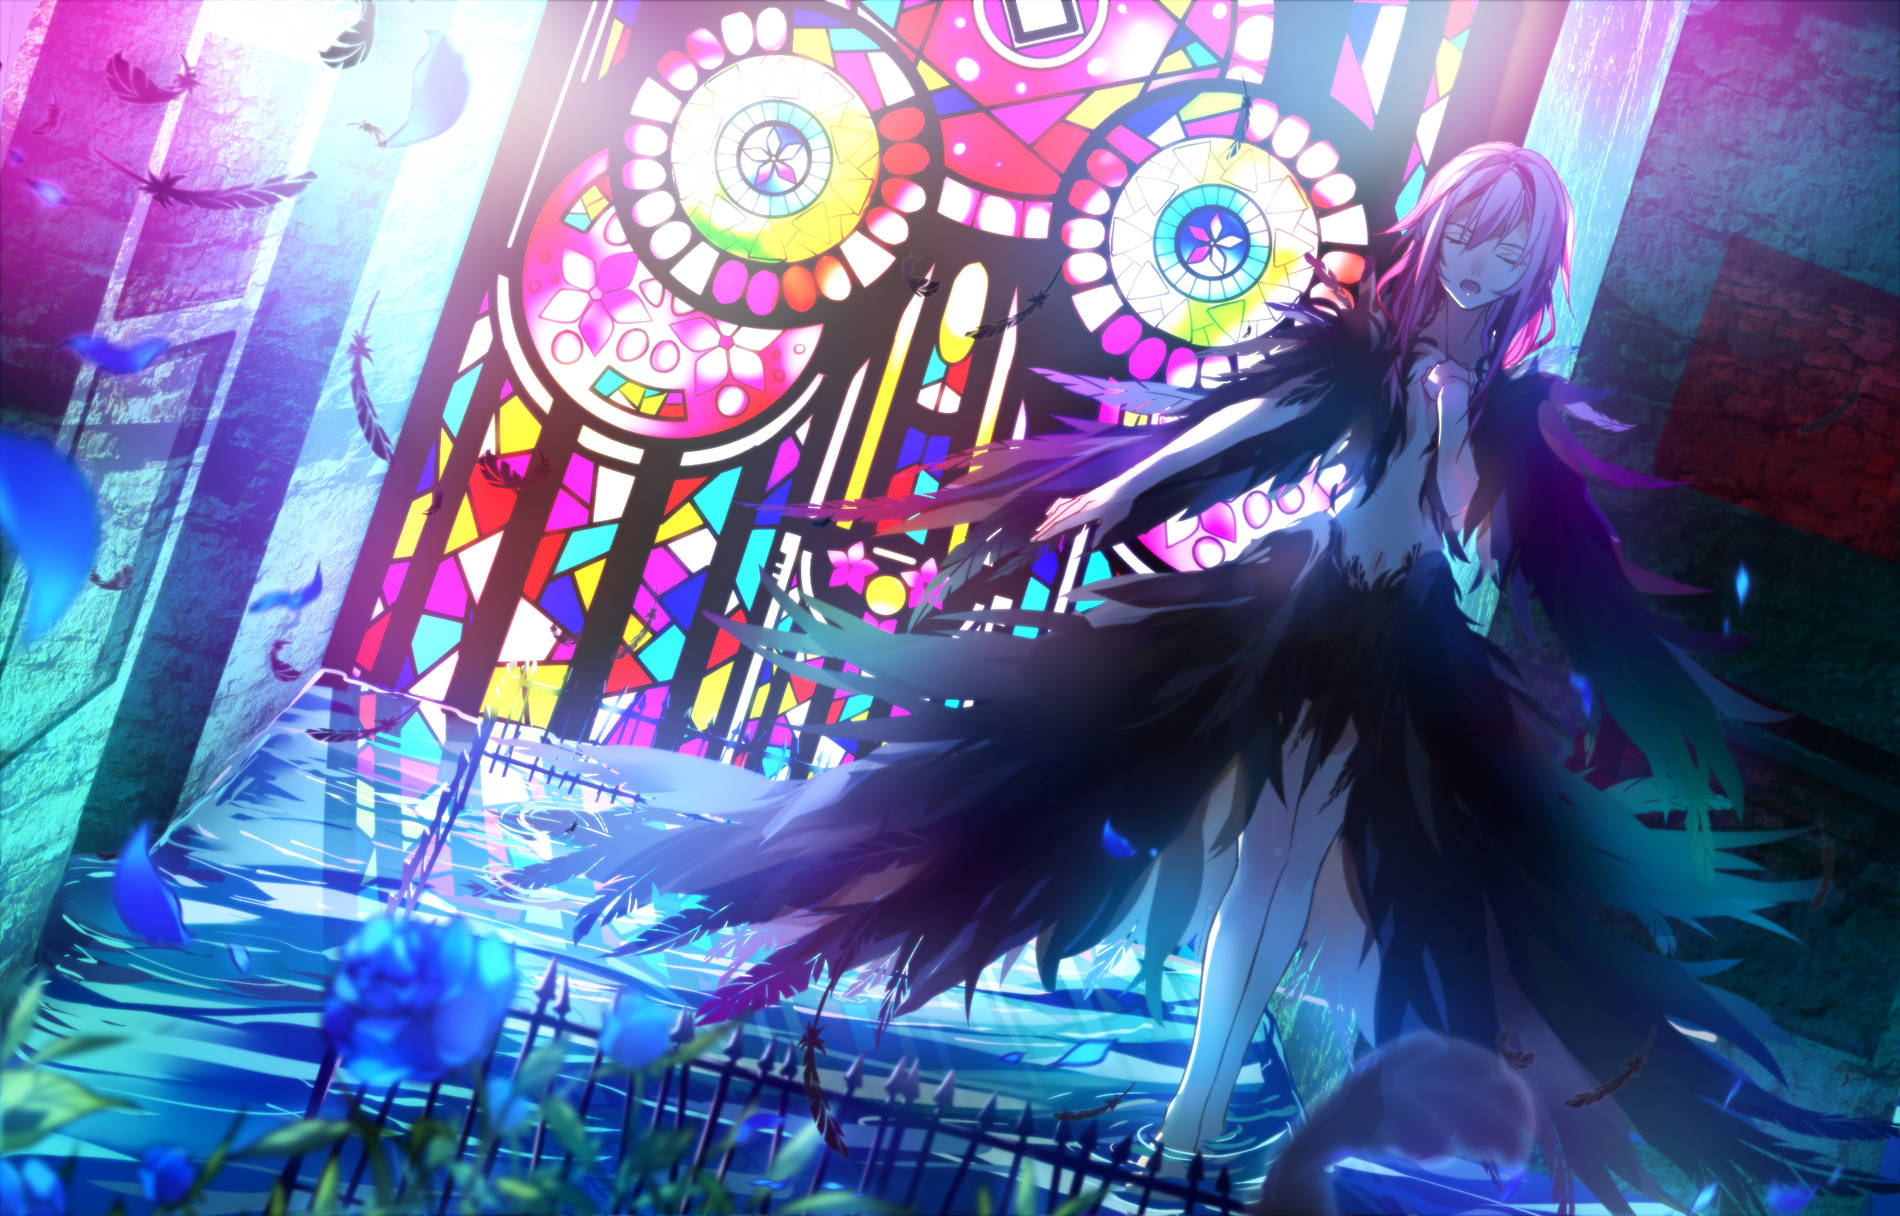 Guilty Crown Inori In Feathery Outfit Wallpaper